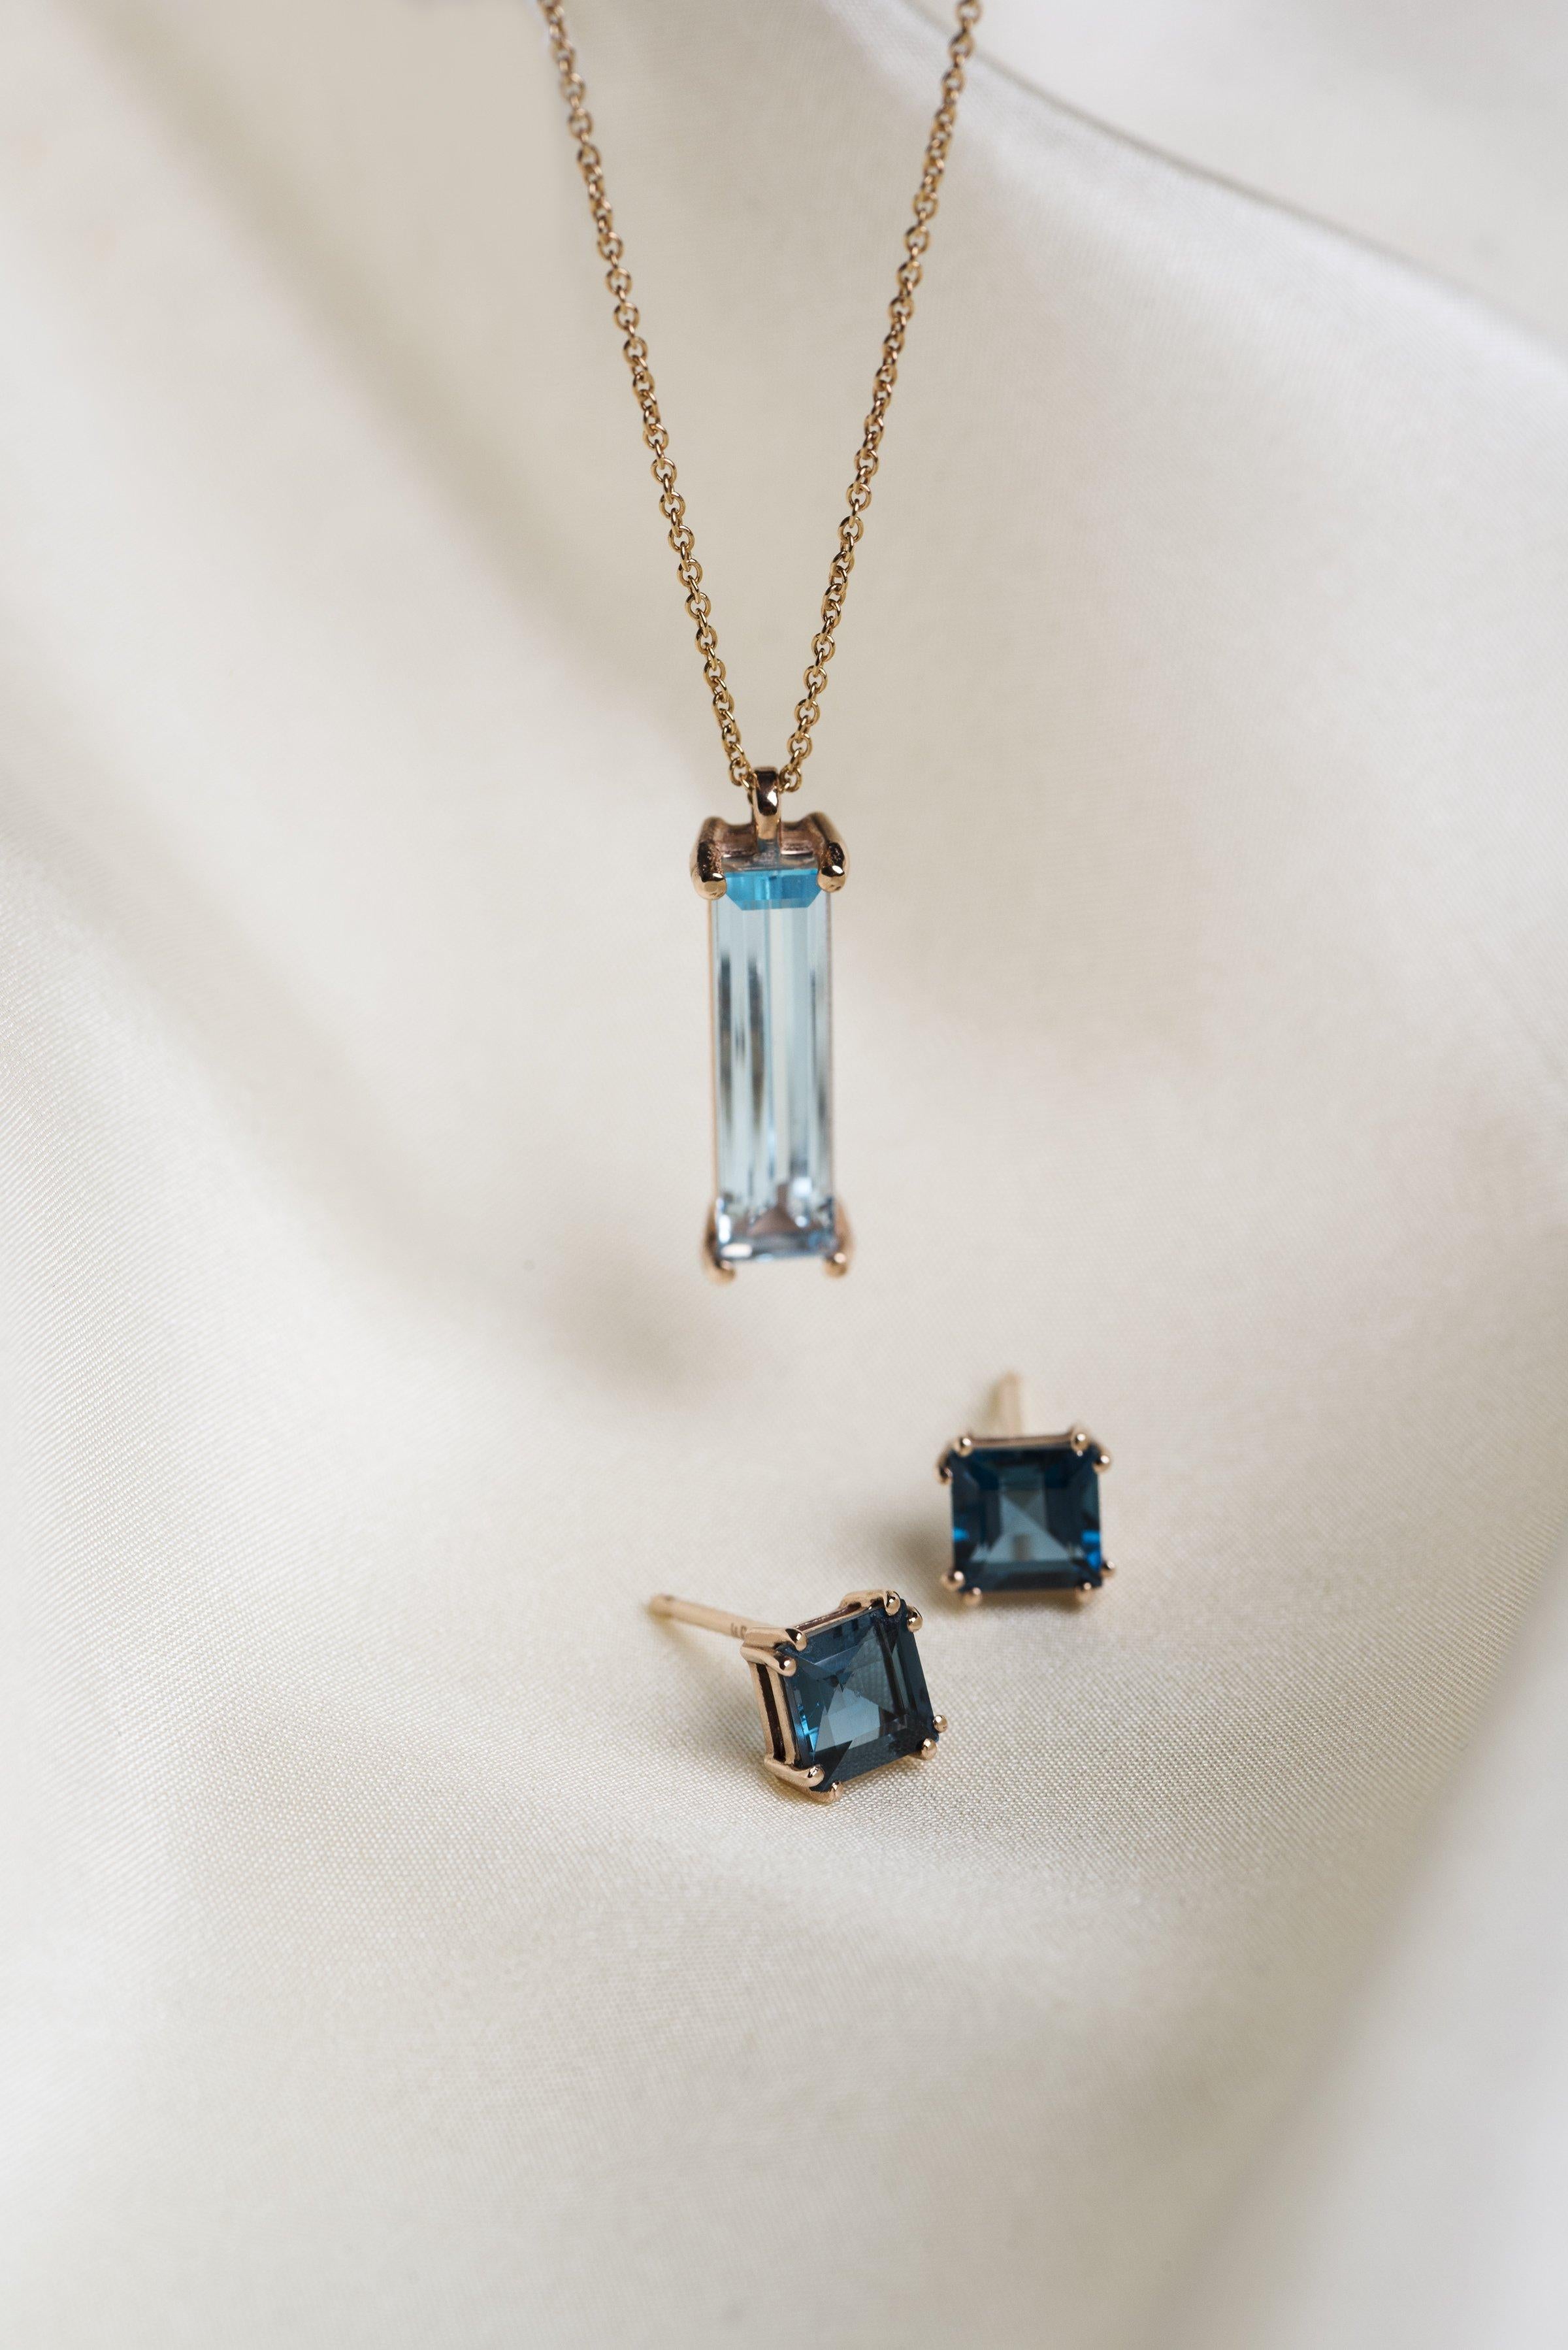 14K Rose Gold Princess Cut London Blue Topaz Sophia Stud Earrings. (Stud only, earring extender sold separately).
Weight: 2.36 grams.
Topaz Carats: 3.10 ct.
Wear individually as Stud Earrings or customize with long Bar Earrings.
Handmade in